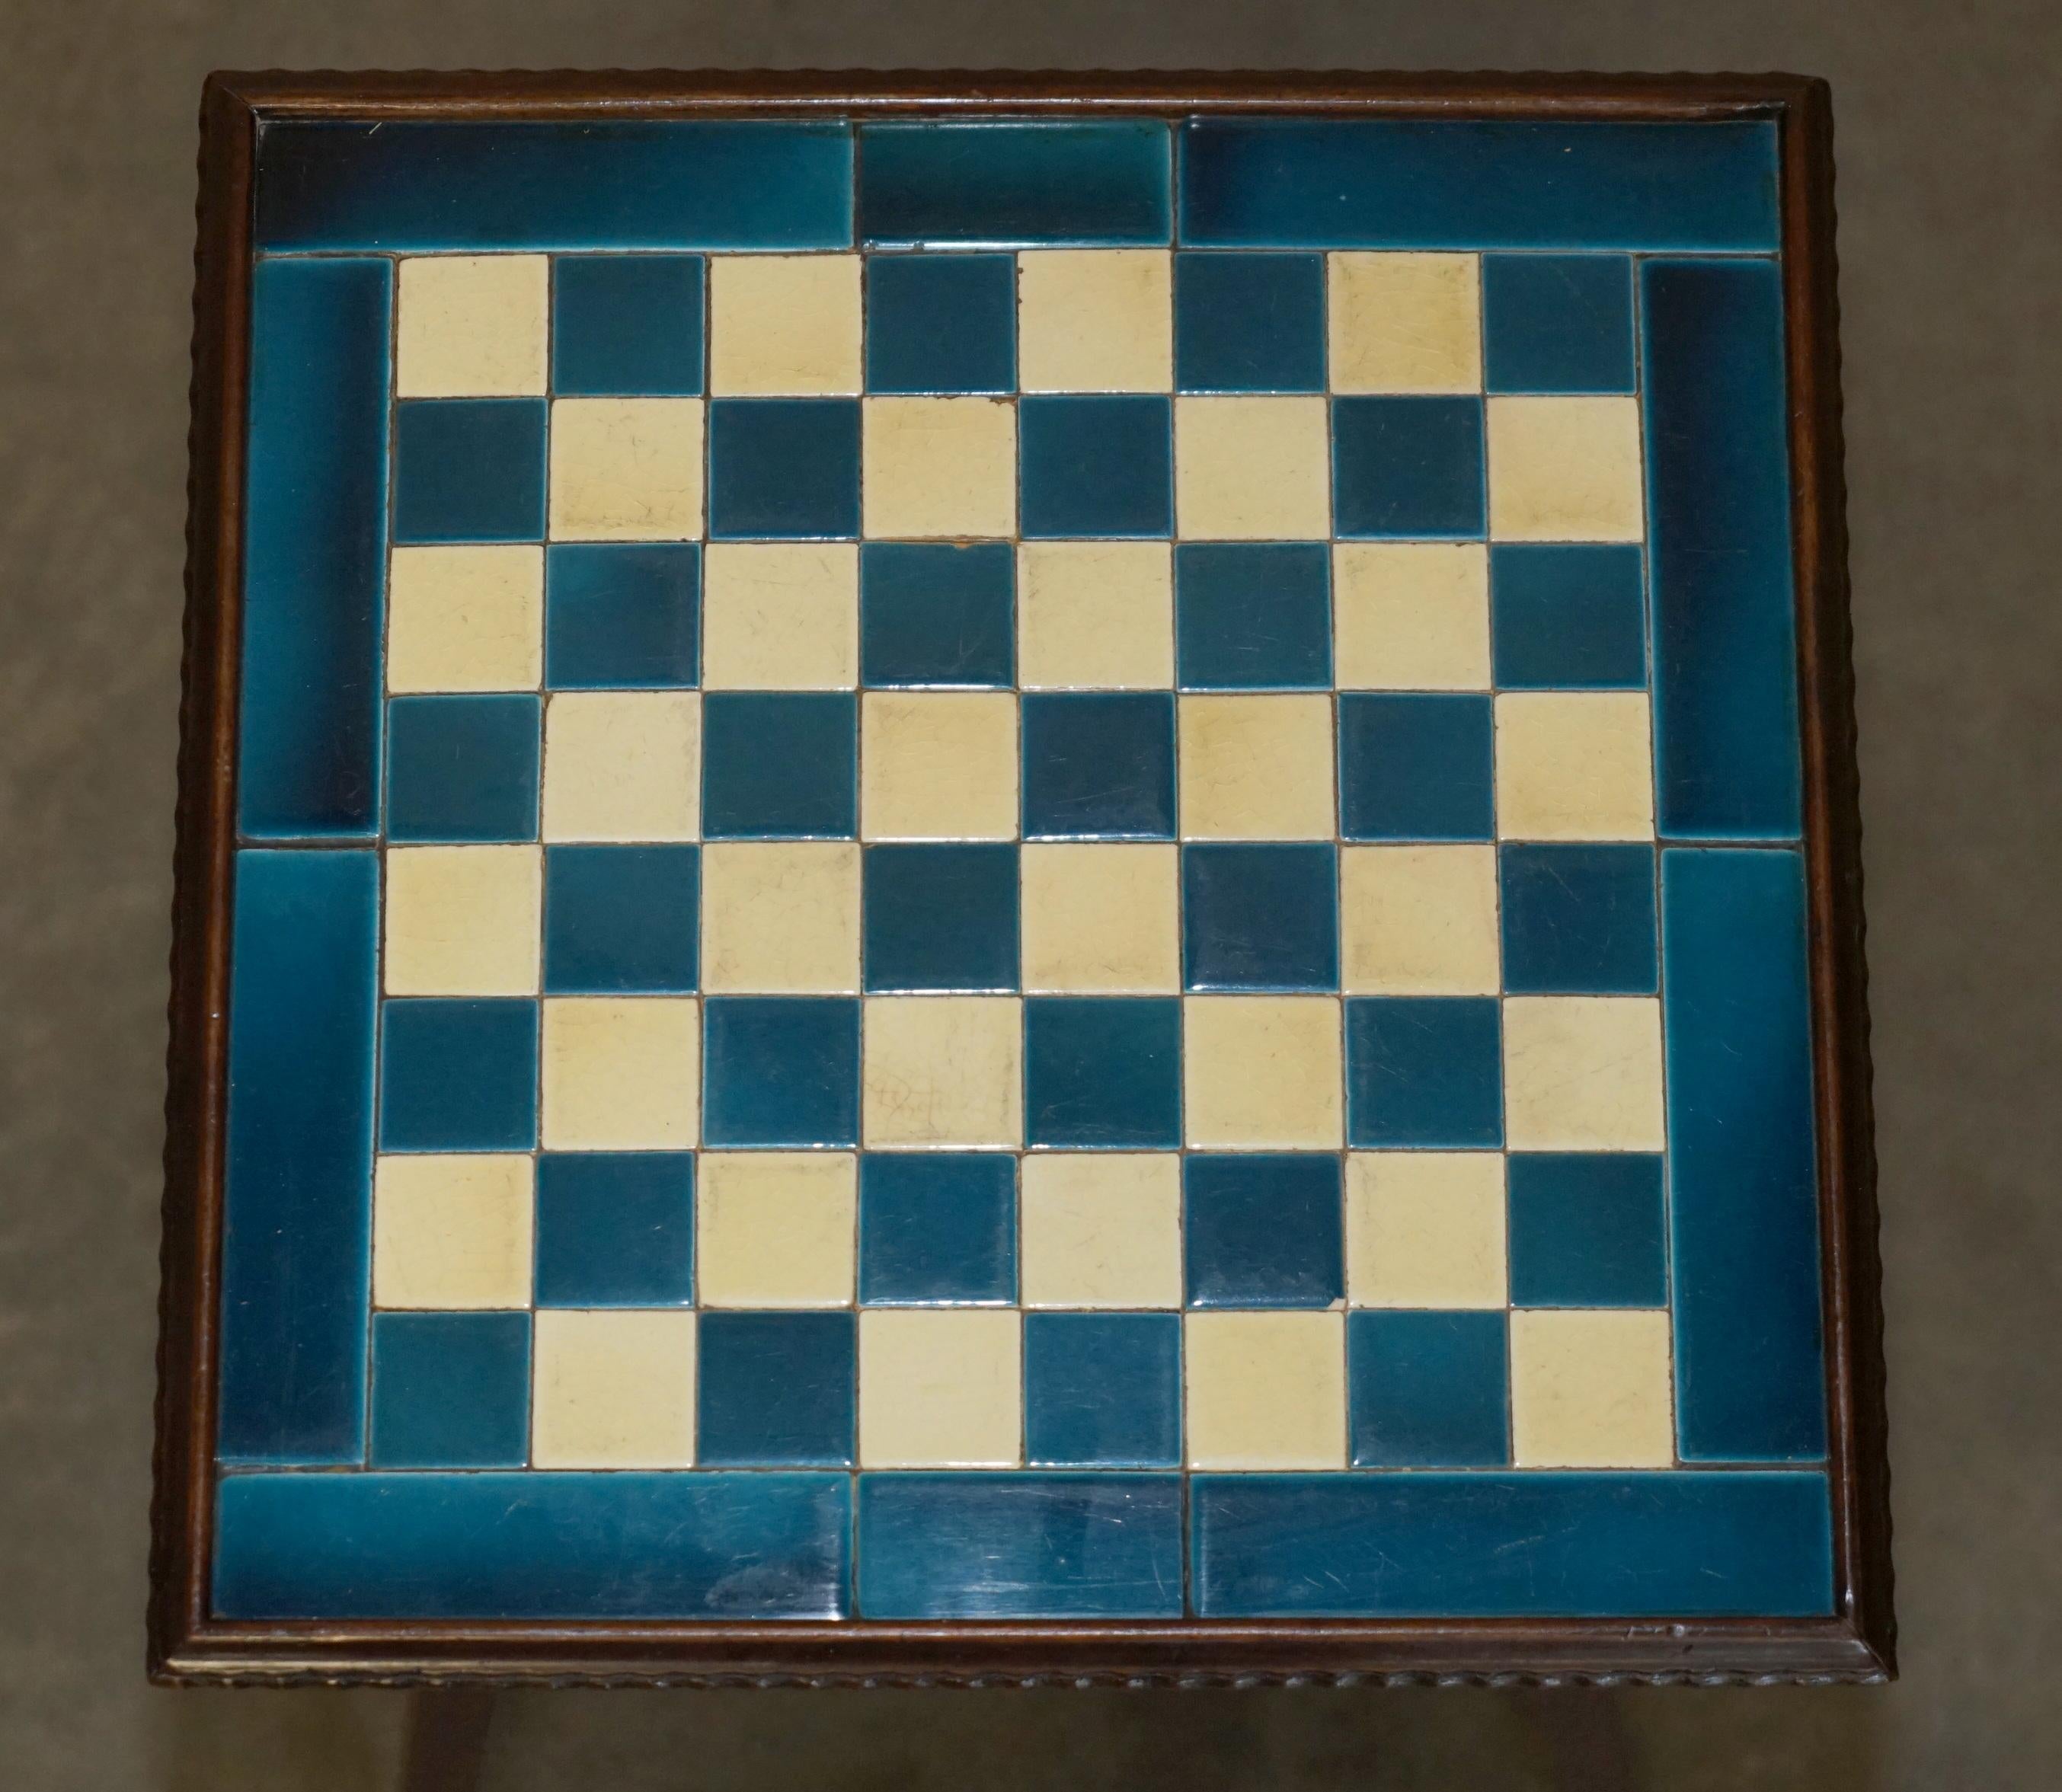 English ANTIQUE VICTORIAN AESTHETIC MOVEMENT STYLE TiLED TOP CHESSBOARD CHESS TABLE For Sale